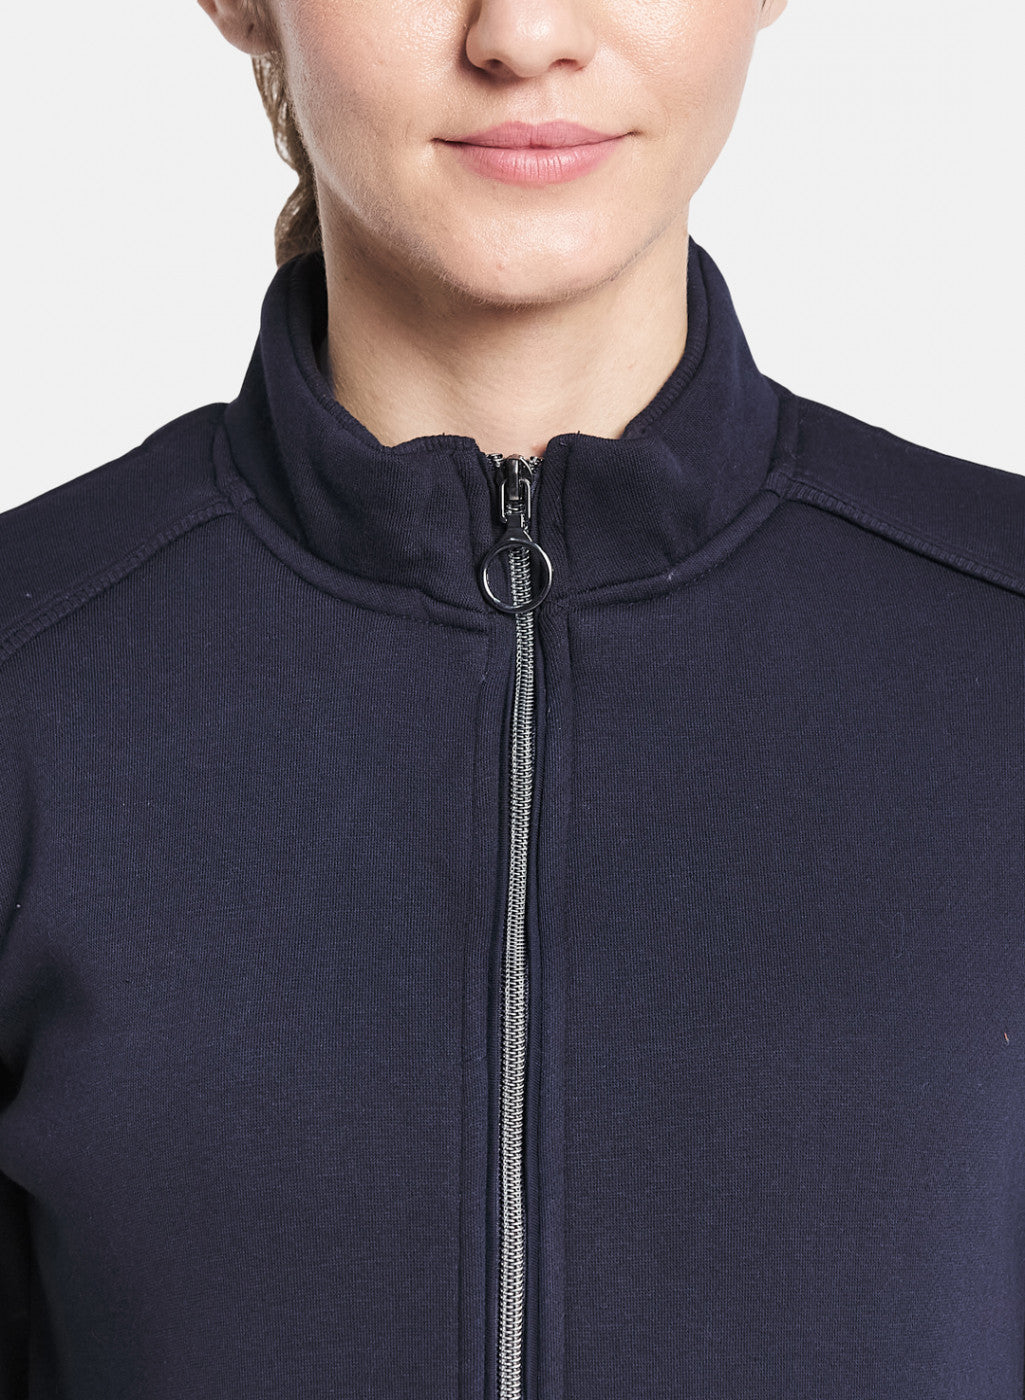 Women Navy Blue Solid Tracksuit